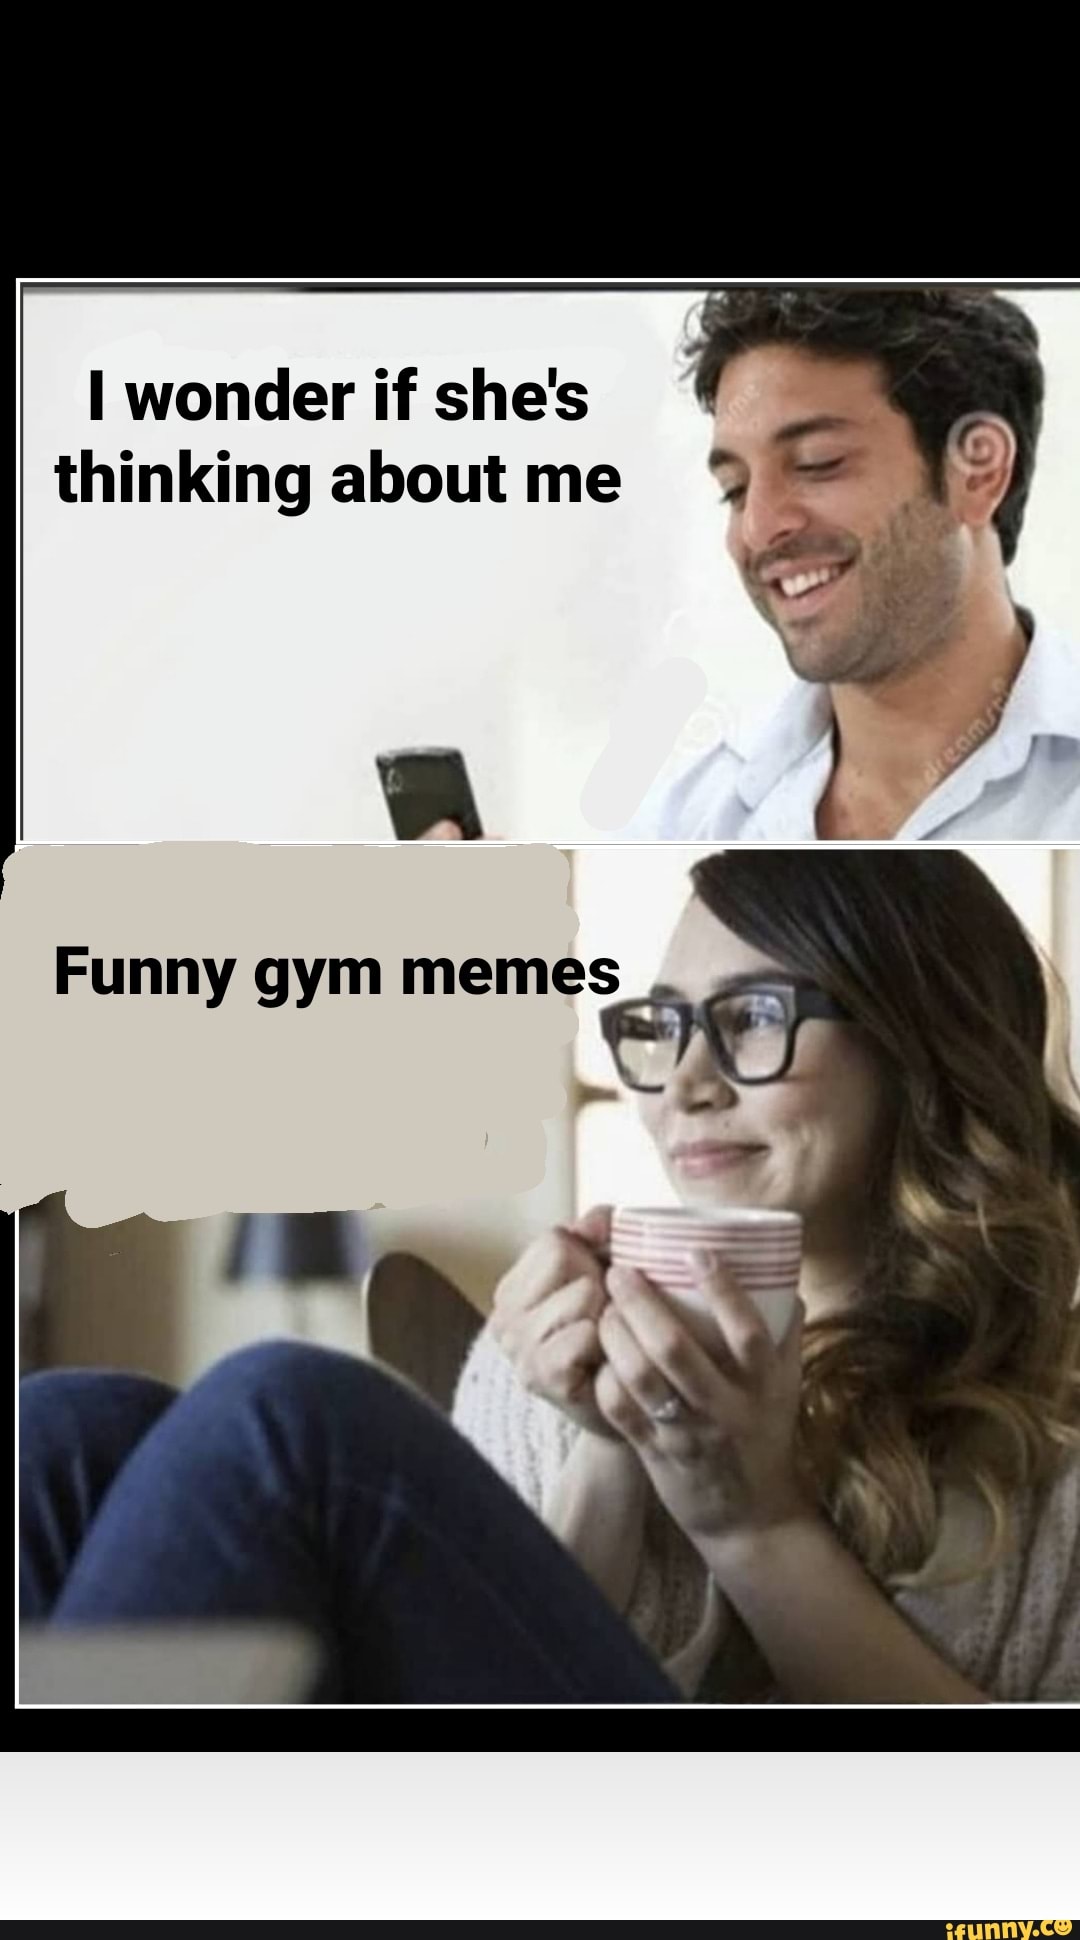 I Wonder If He's Thinking About Me' Memes Are The Newest Stock Photo  Sensation - Memebase - Funny Memes